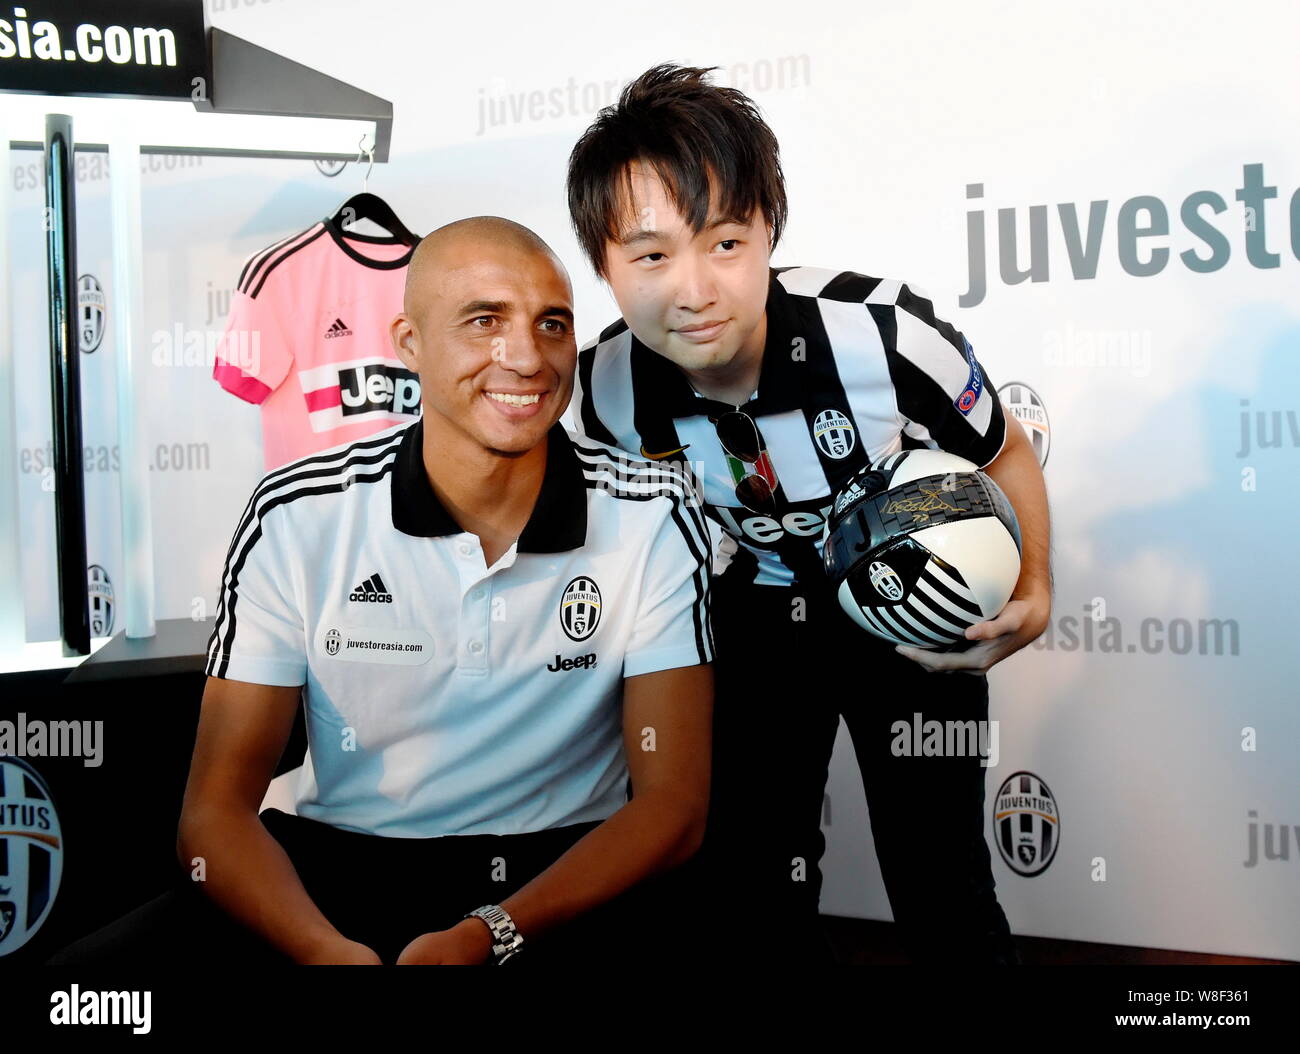 Geroosterd Meer Onweersbui Former Juventus soccer star David Trezeguet, left, poses with a football  fan at an official launch event for Juventus' Asian online store  juvestoreasi Stock Photo - Alamy